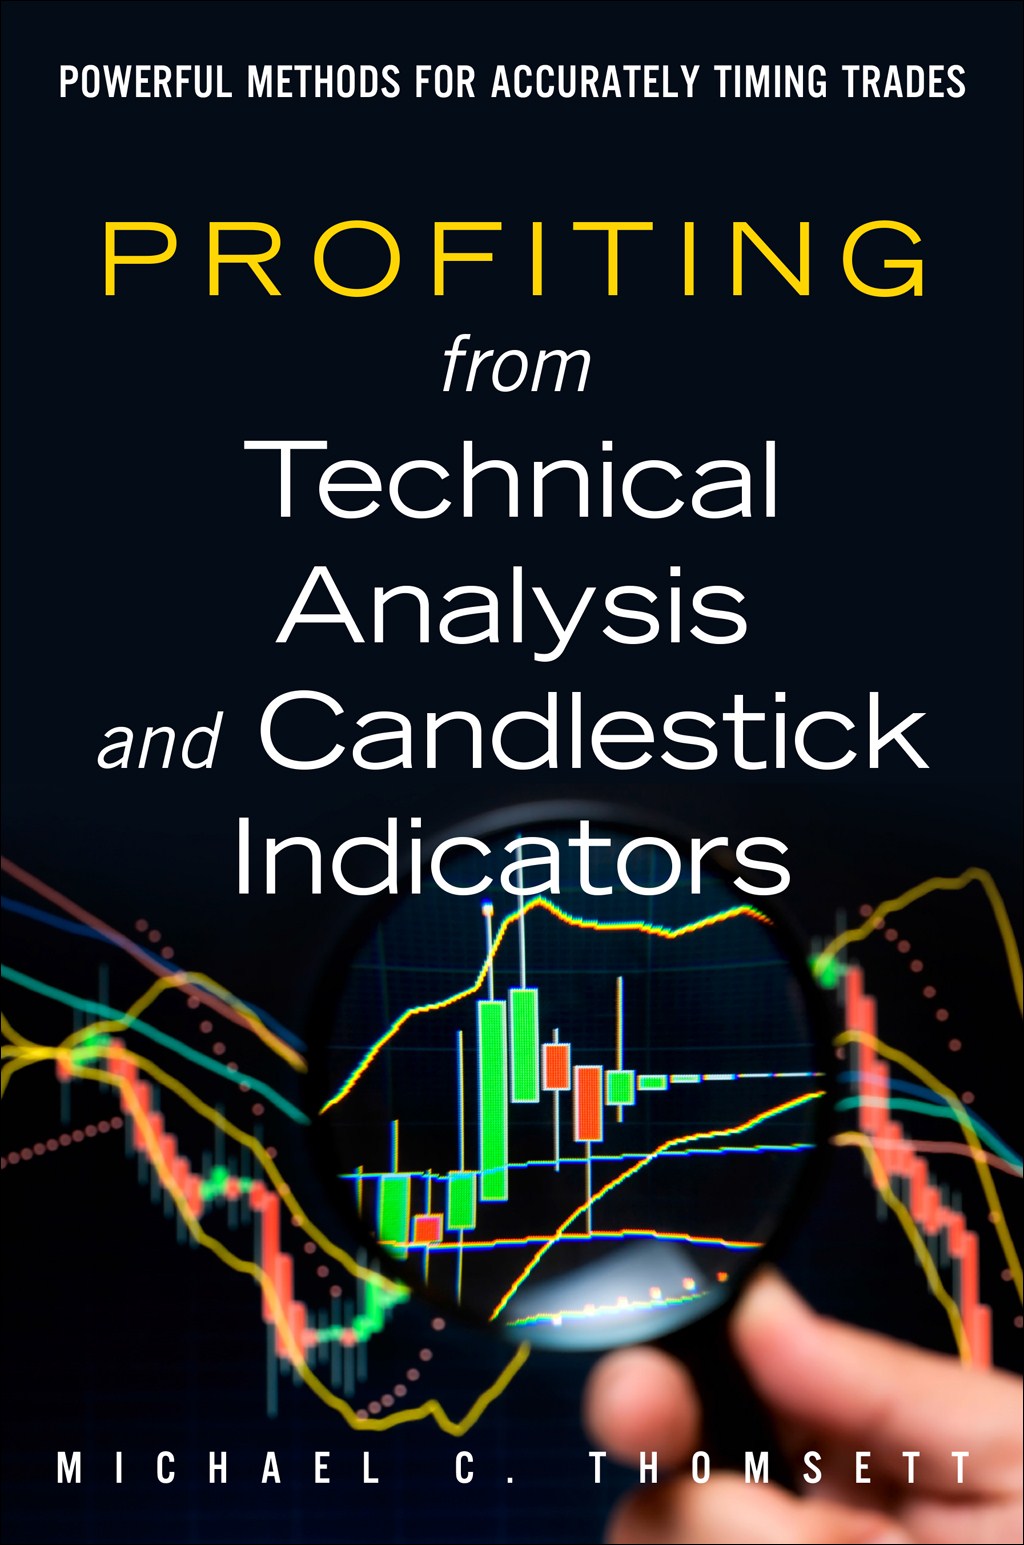 Profiting from Technical Analysis and Candlestick Indicators: Powerful Methods for Accurately Timing Trades